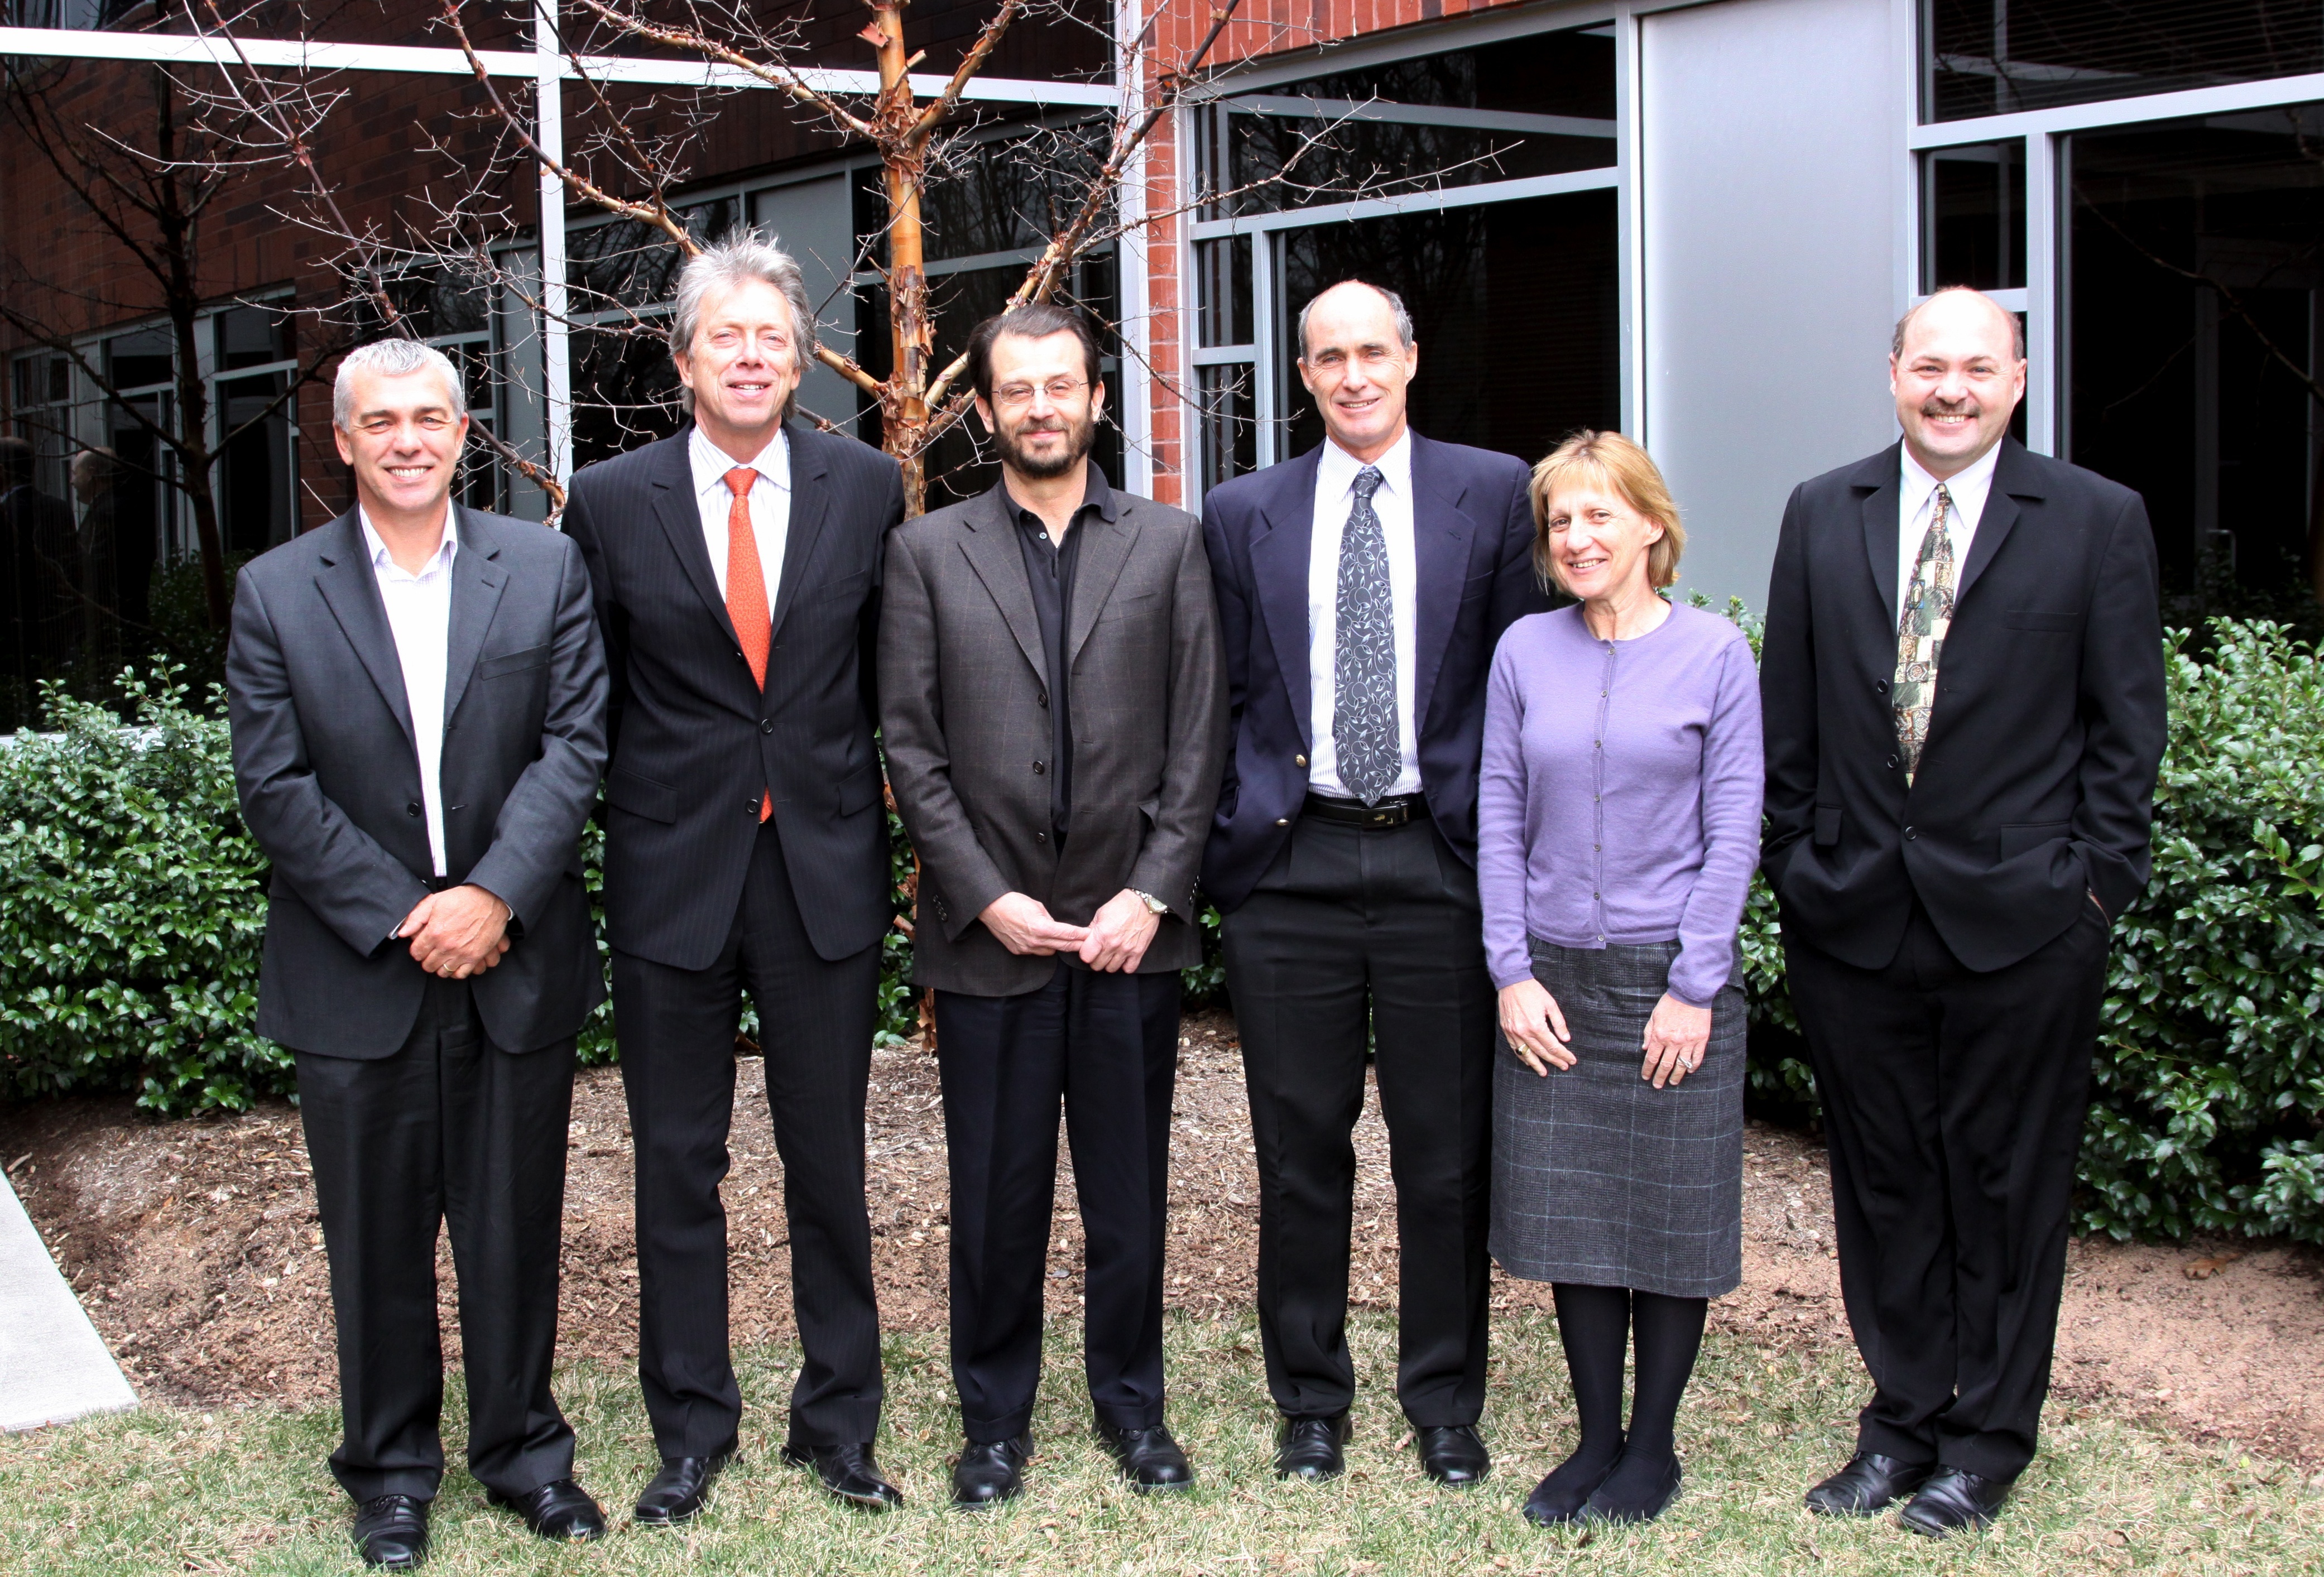 Left to right: University of Wollongong Vice-Principal of Administration Chris Grange, Virginia Bioinformatics Institute Interim Director Paul Knox, Virginia Bioinformatics Institute's Network Dynamics and Simulation Science Laboratory Director Chris Barrett, University of Wollongong Dean of Engineering Chris Cook, University of Wollongong Vice-Principal of Research and Professor Judy Raper, and University of Wollongong Head of the School of Mathematics and Applied Statistics and Professor Tim March